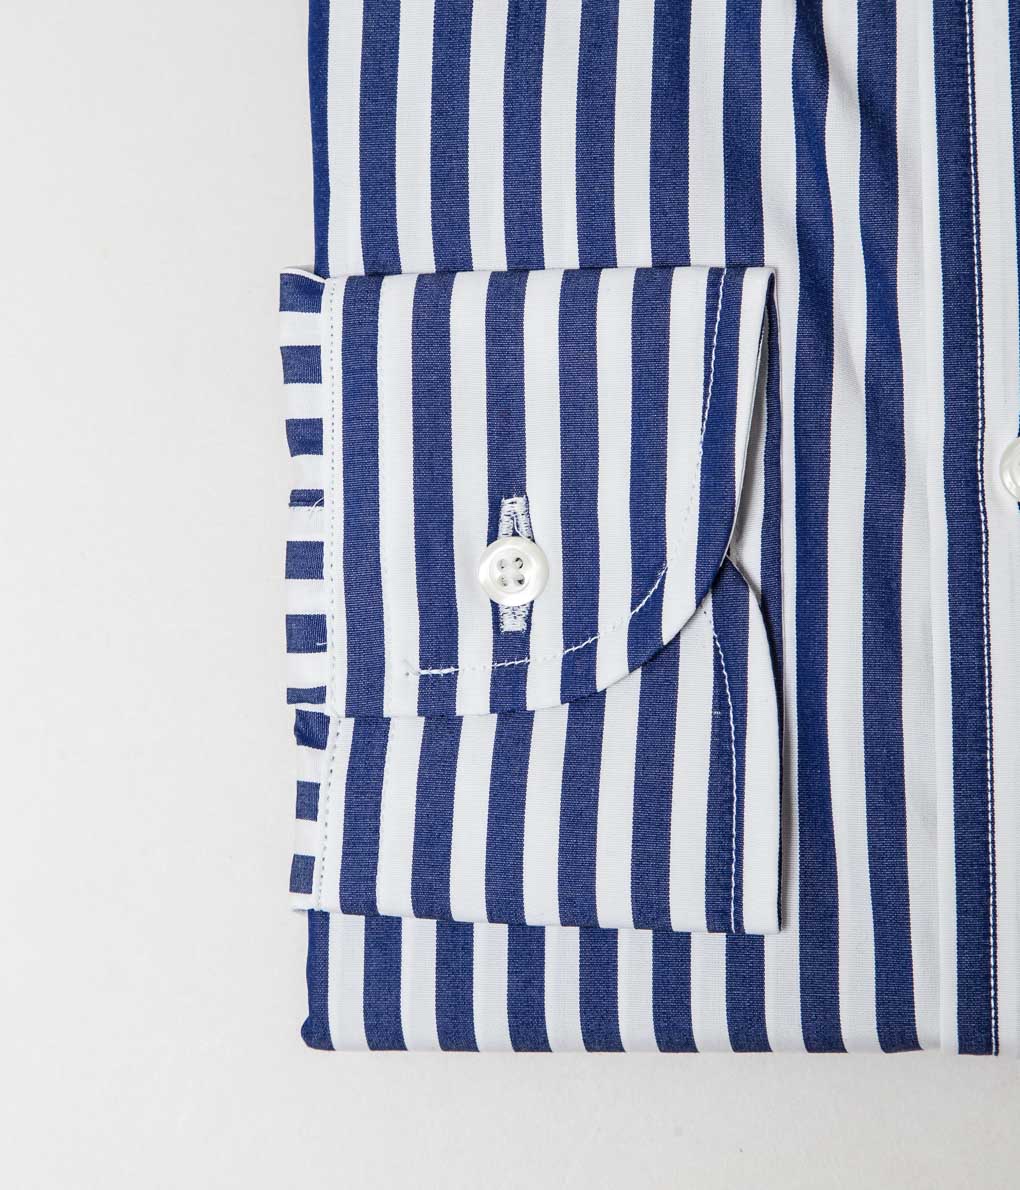 INDIVIDUALIZED SHIRTS "BARBER STRIPE (STANDARD FIT BUTTON DOWN SHIRT)" (BLUE)